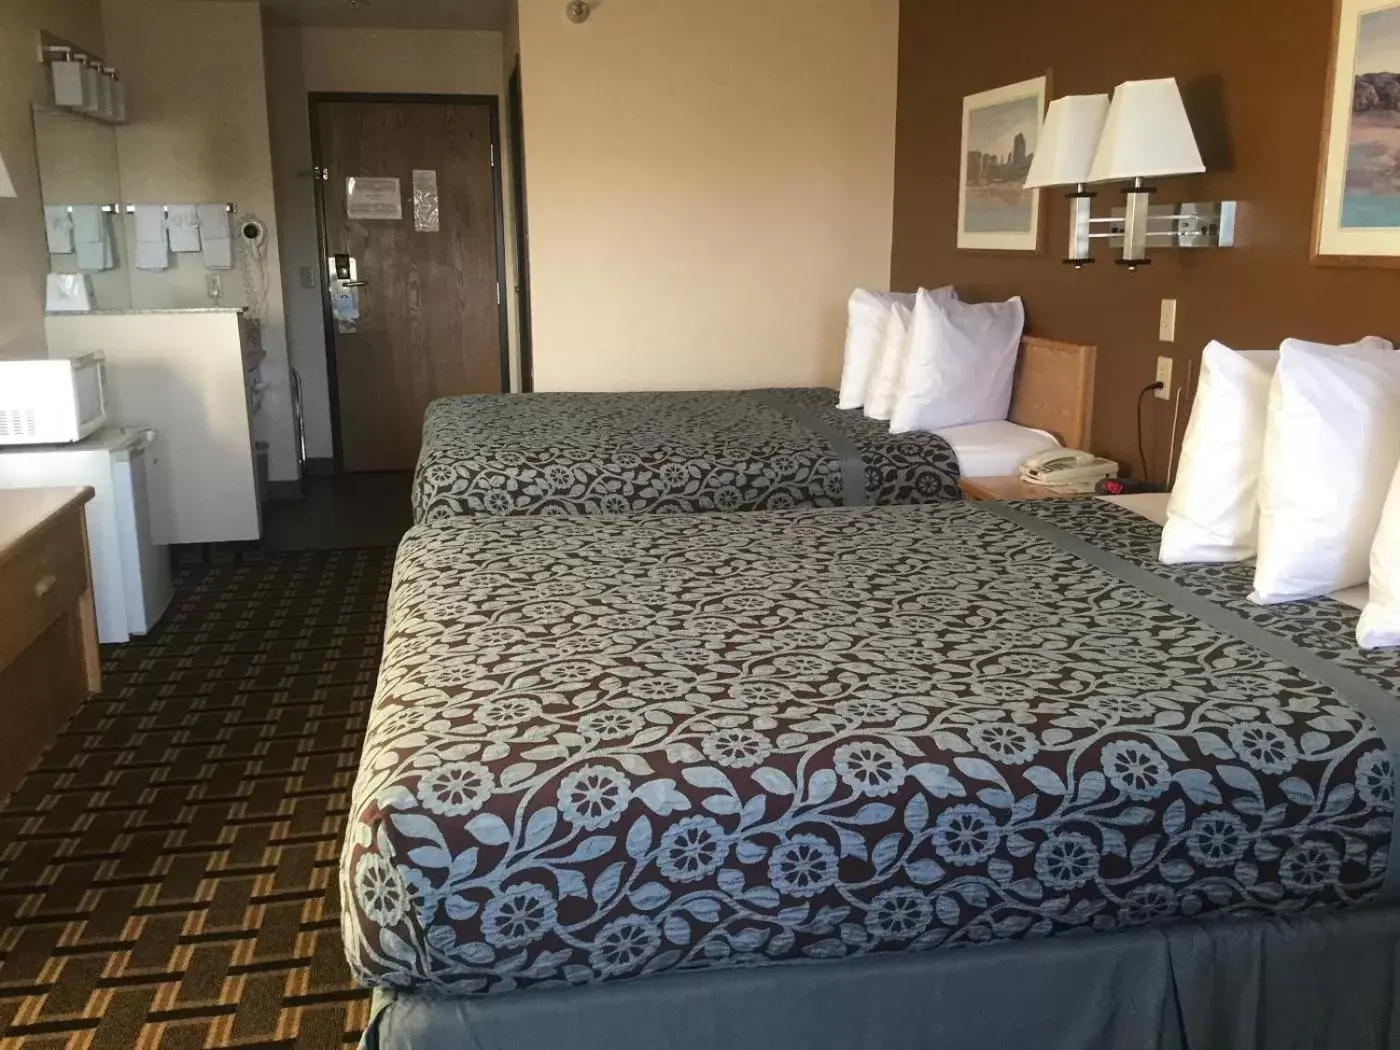 Bed in Days Inn by Wyndham Hurricane/Zion National Park Area